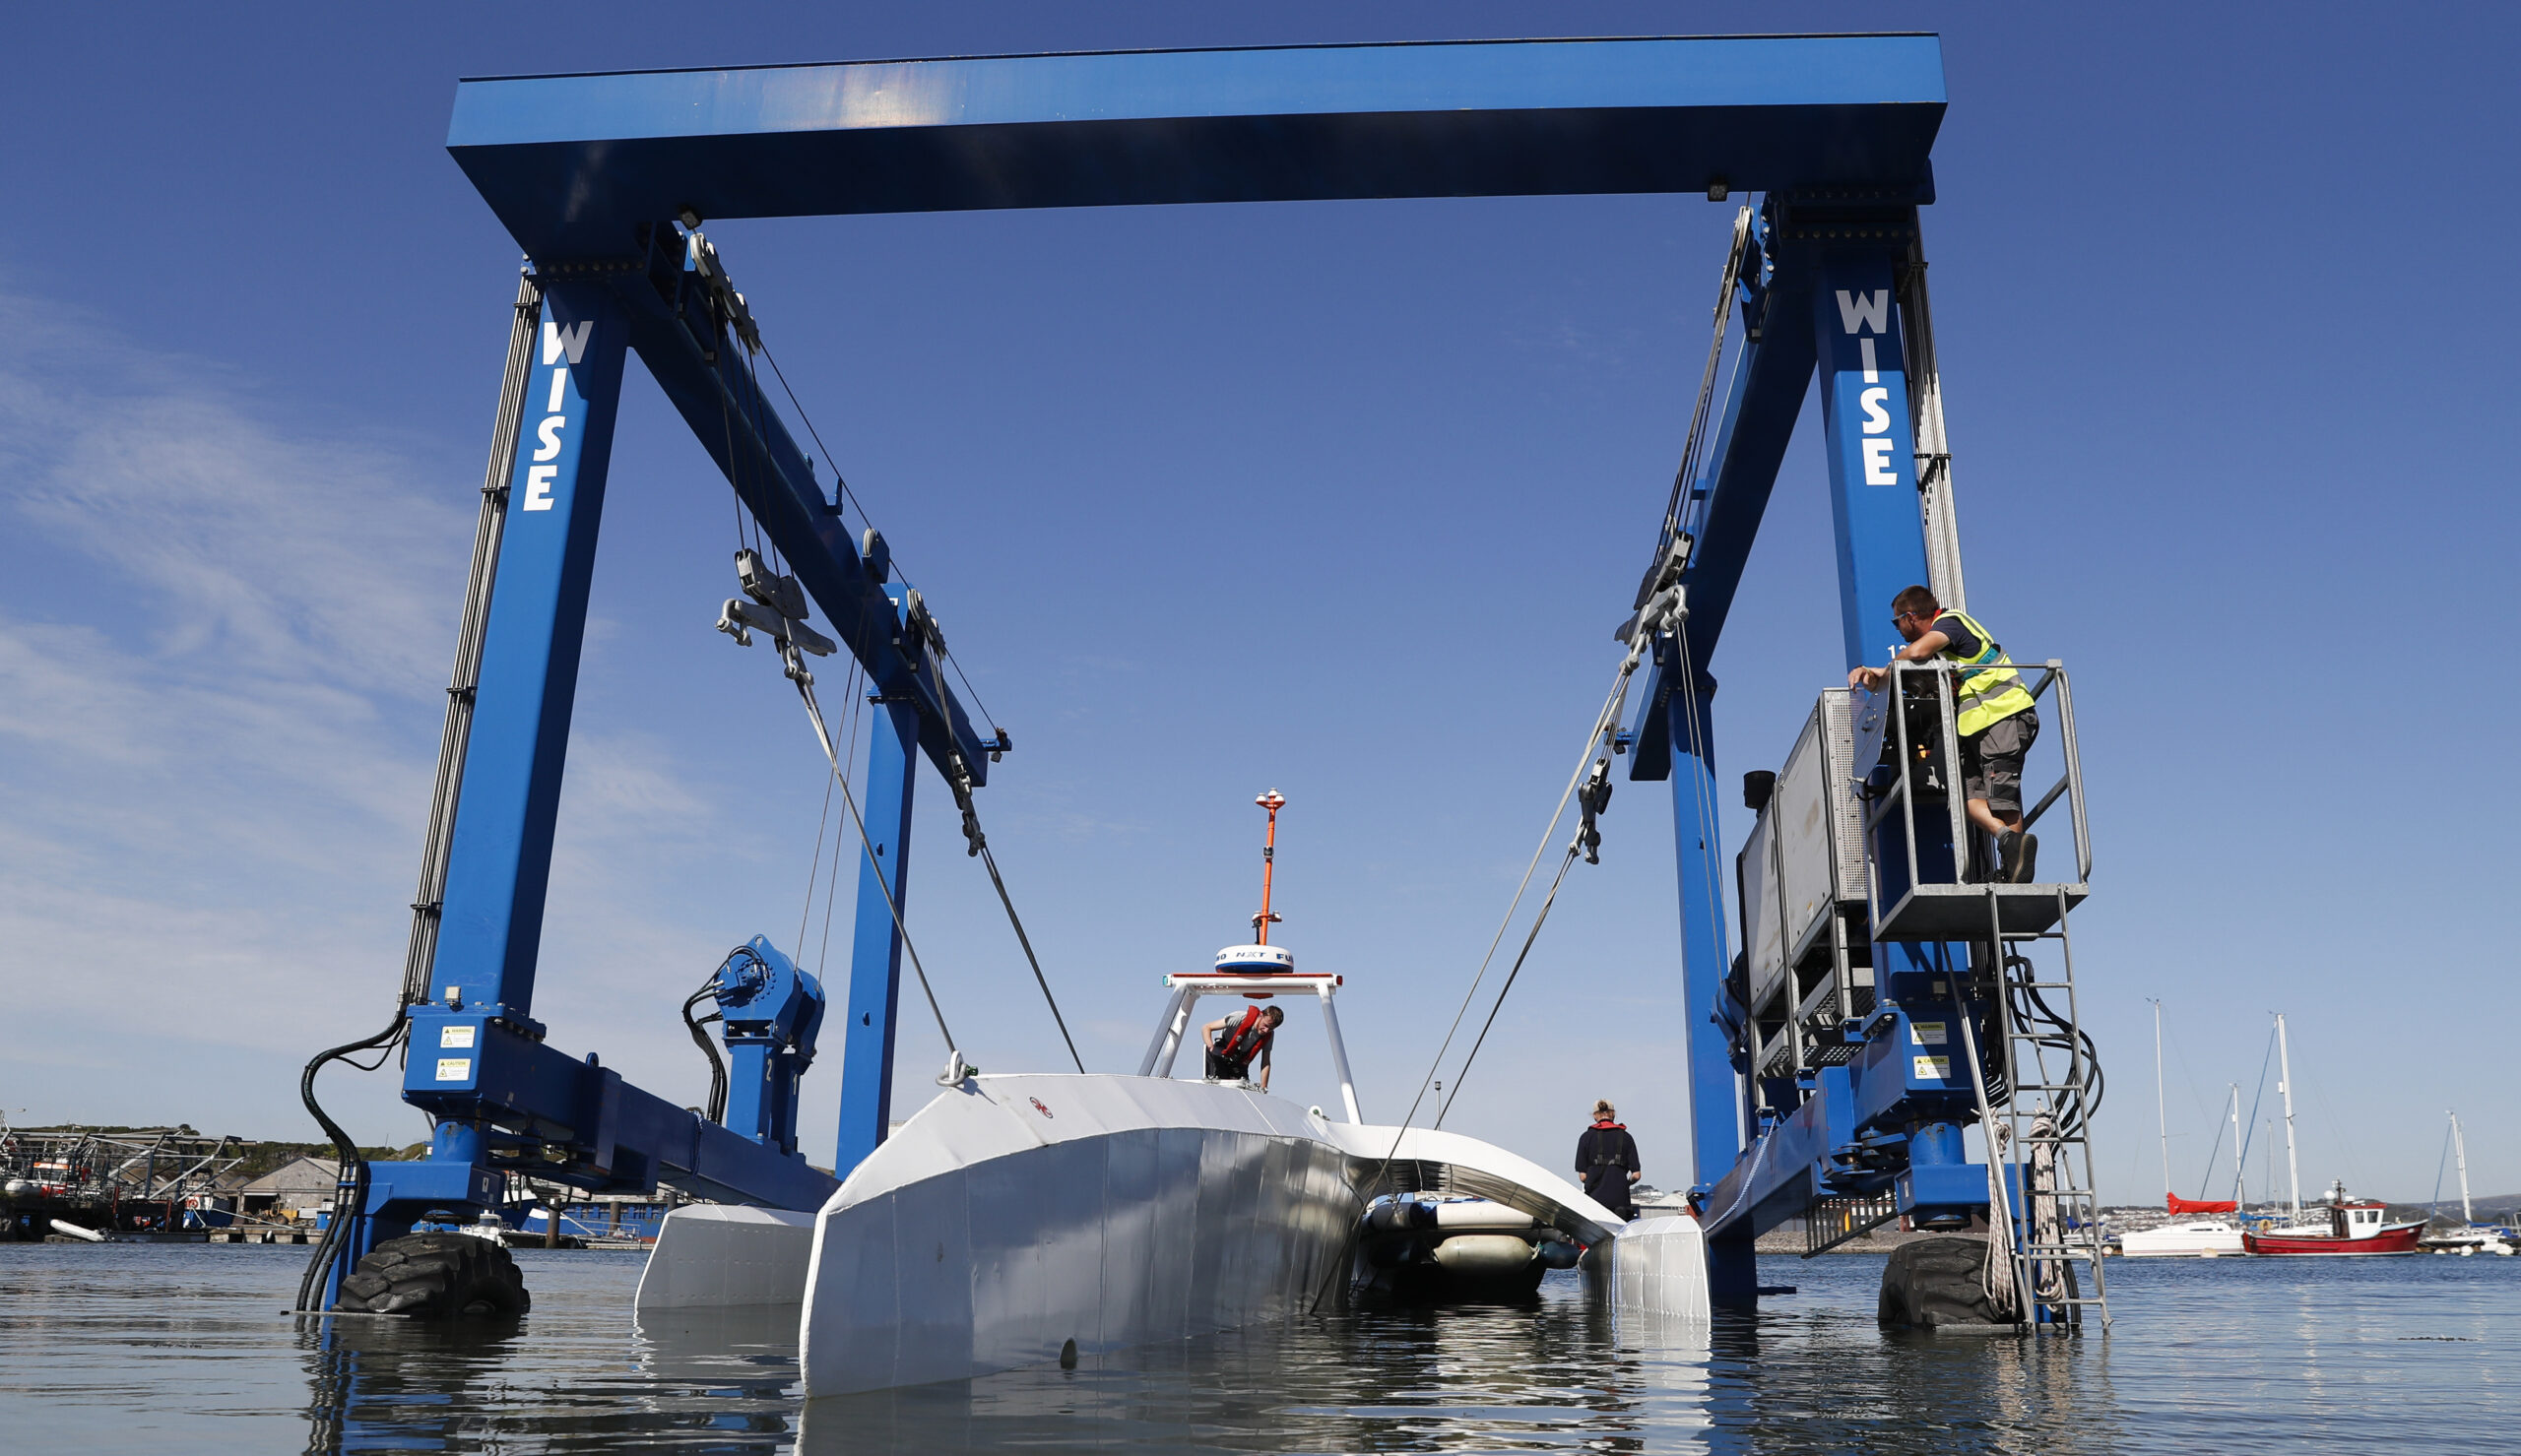 FILE - Technicians lower the Mayflower Autonomous Ship into the water at its launch site on Sept. 14, 2020, for its first outing on water since being built in Turnchapel, Plymouth south west England. The sleek autonomous trimaran docked in Halifax, Nova Scotia on Sunday, June 5, 2022, after more than five weeks crossing the Atlantic Ocean from England, according to tech company IBM, which helped build it. (AP Photo/Alastair Grant, File)